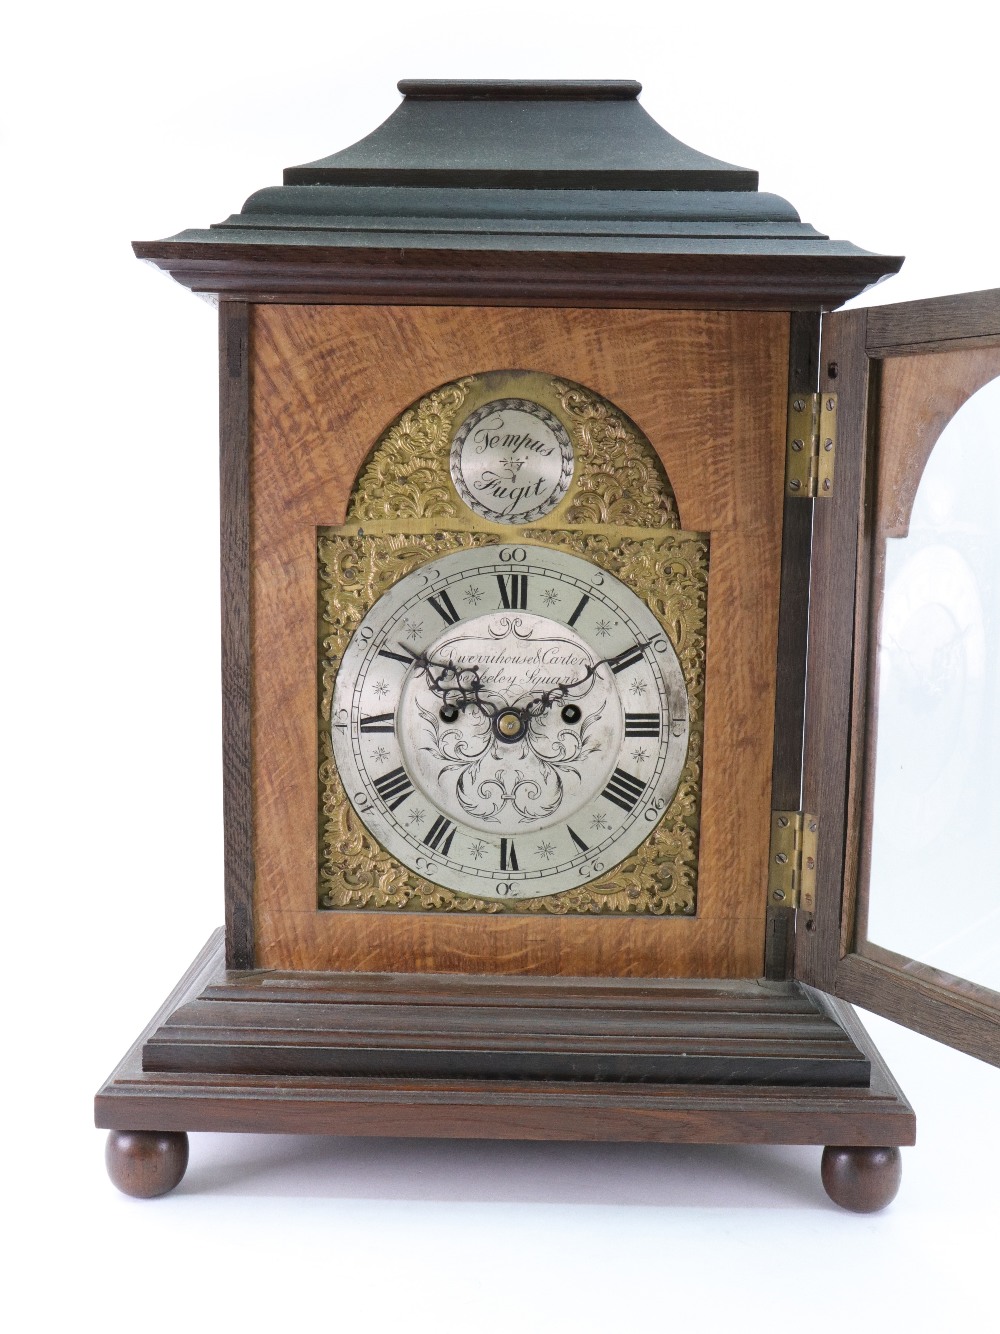 Dwerrihouse & Carter Berkley Square: An early 19th century bracket clock movement, the 7. - Image 6 of 6